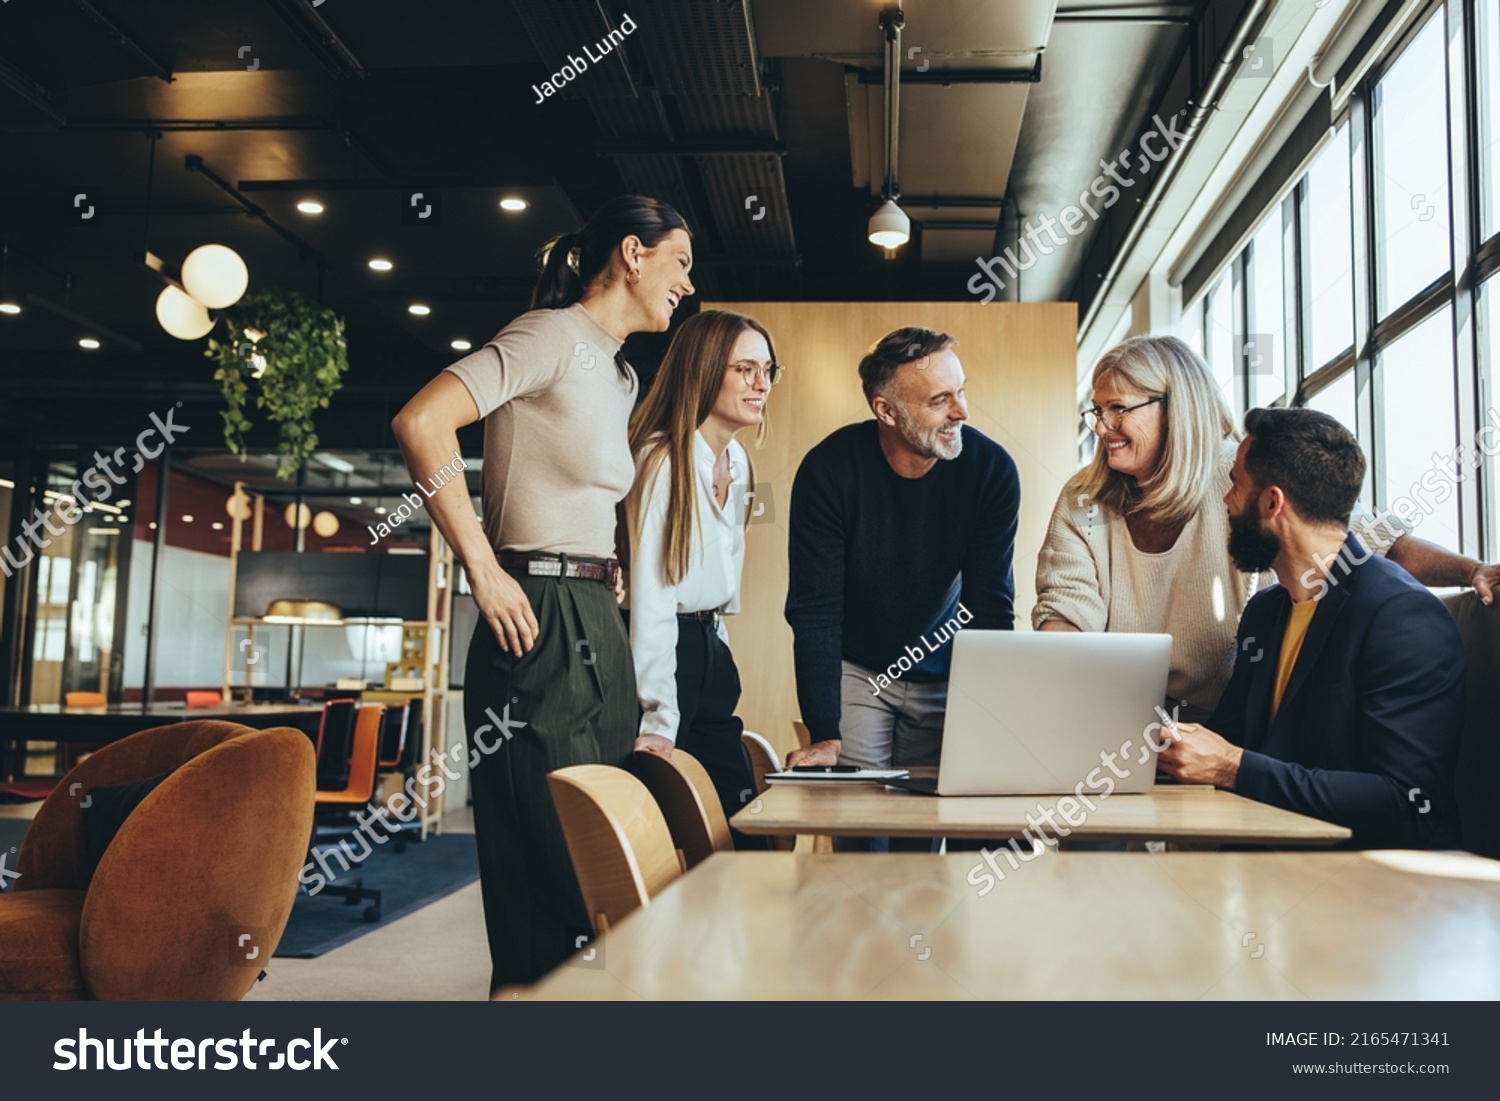 Smiling businesspeople having a discussion while collaborating on a new project in an office. Group of happy businesspeople using a laptop while working together in a modern workspace. #2165471341